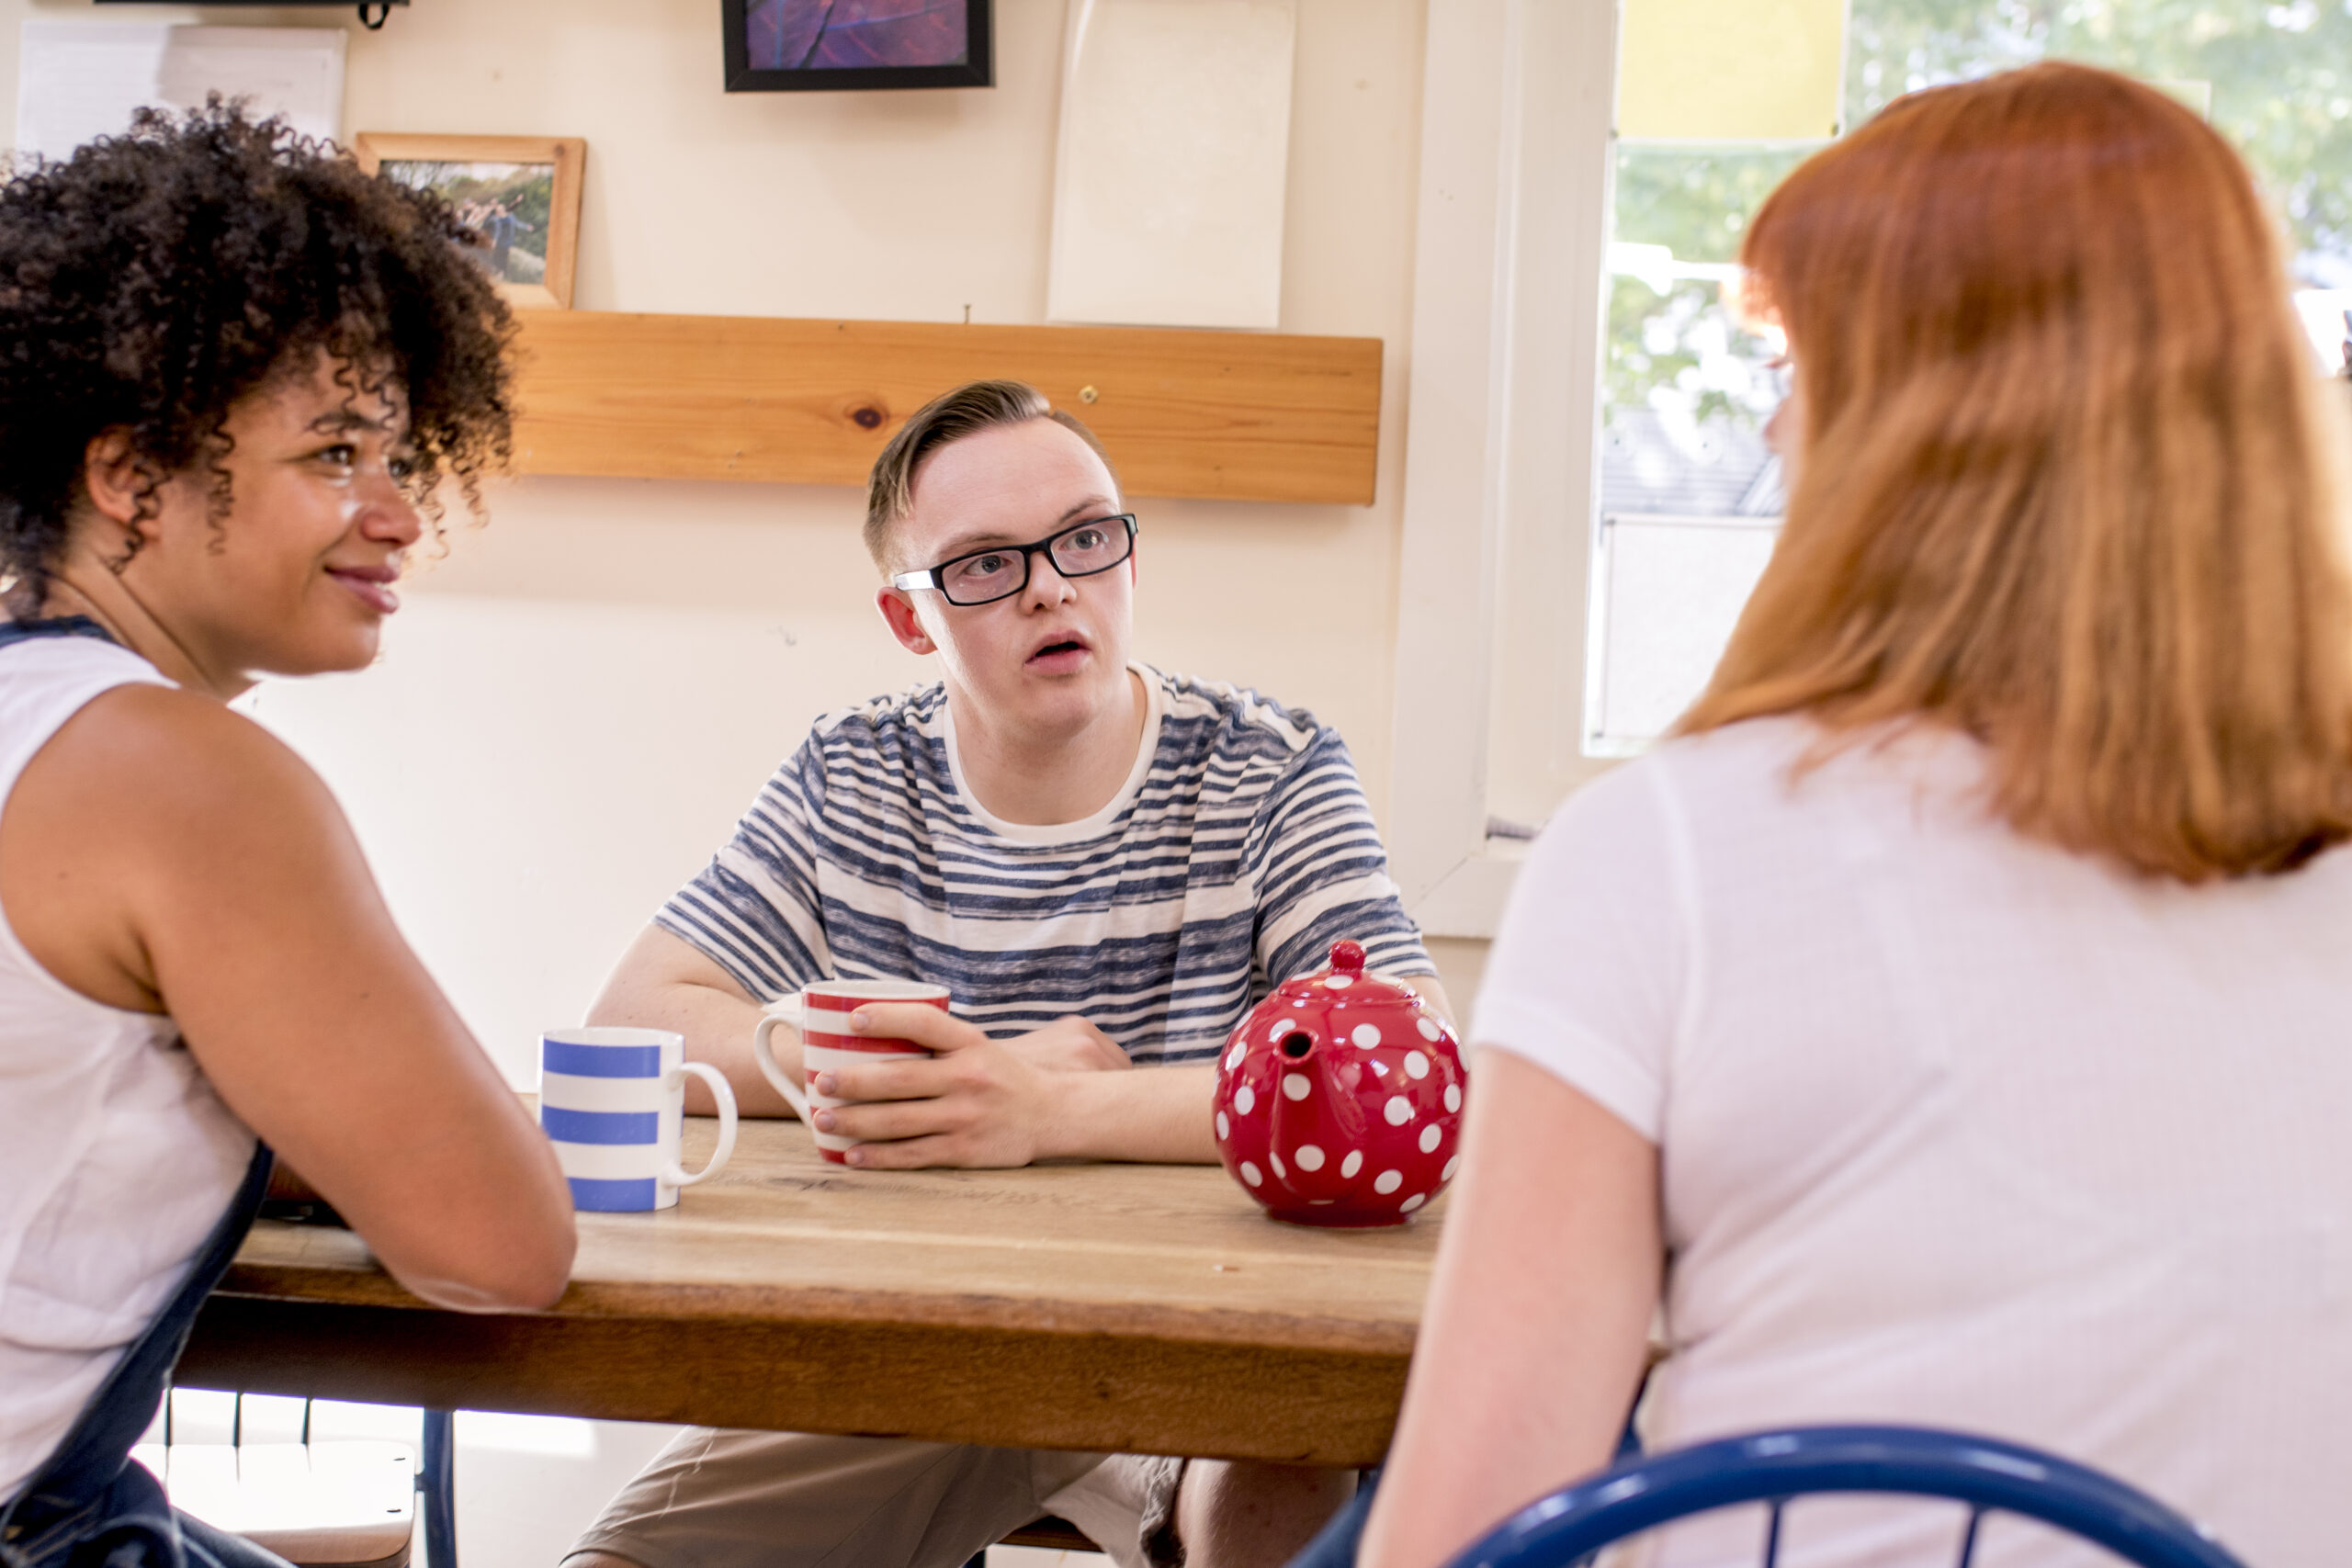 Two caregivers sitting at a table having a discussion with an adult living with an intellectual or developmental disability